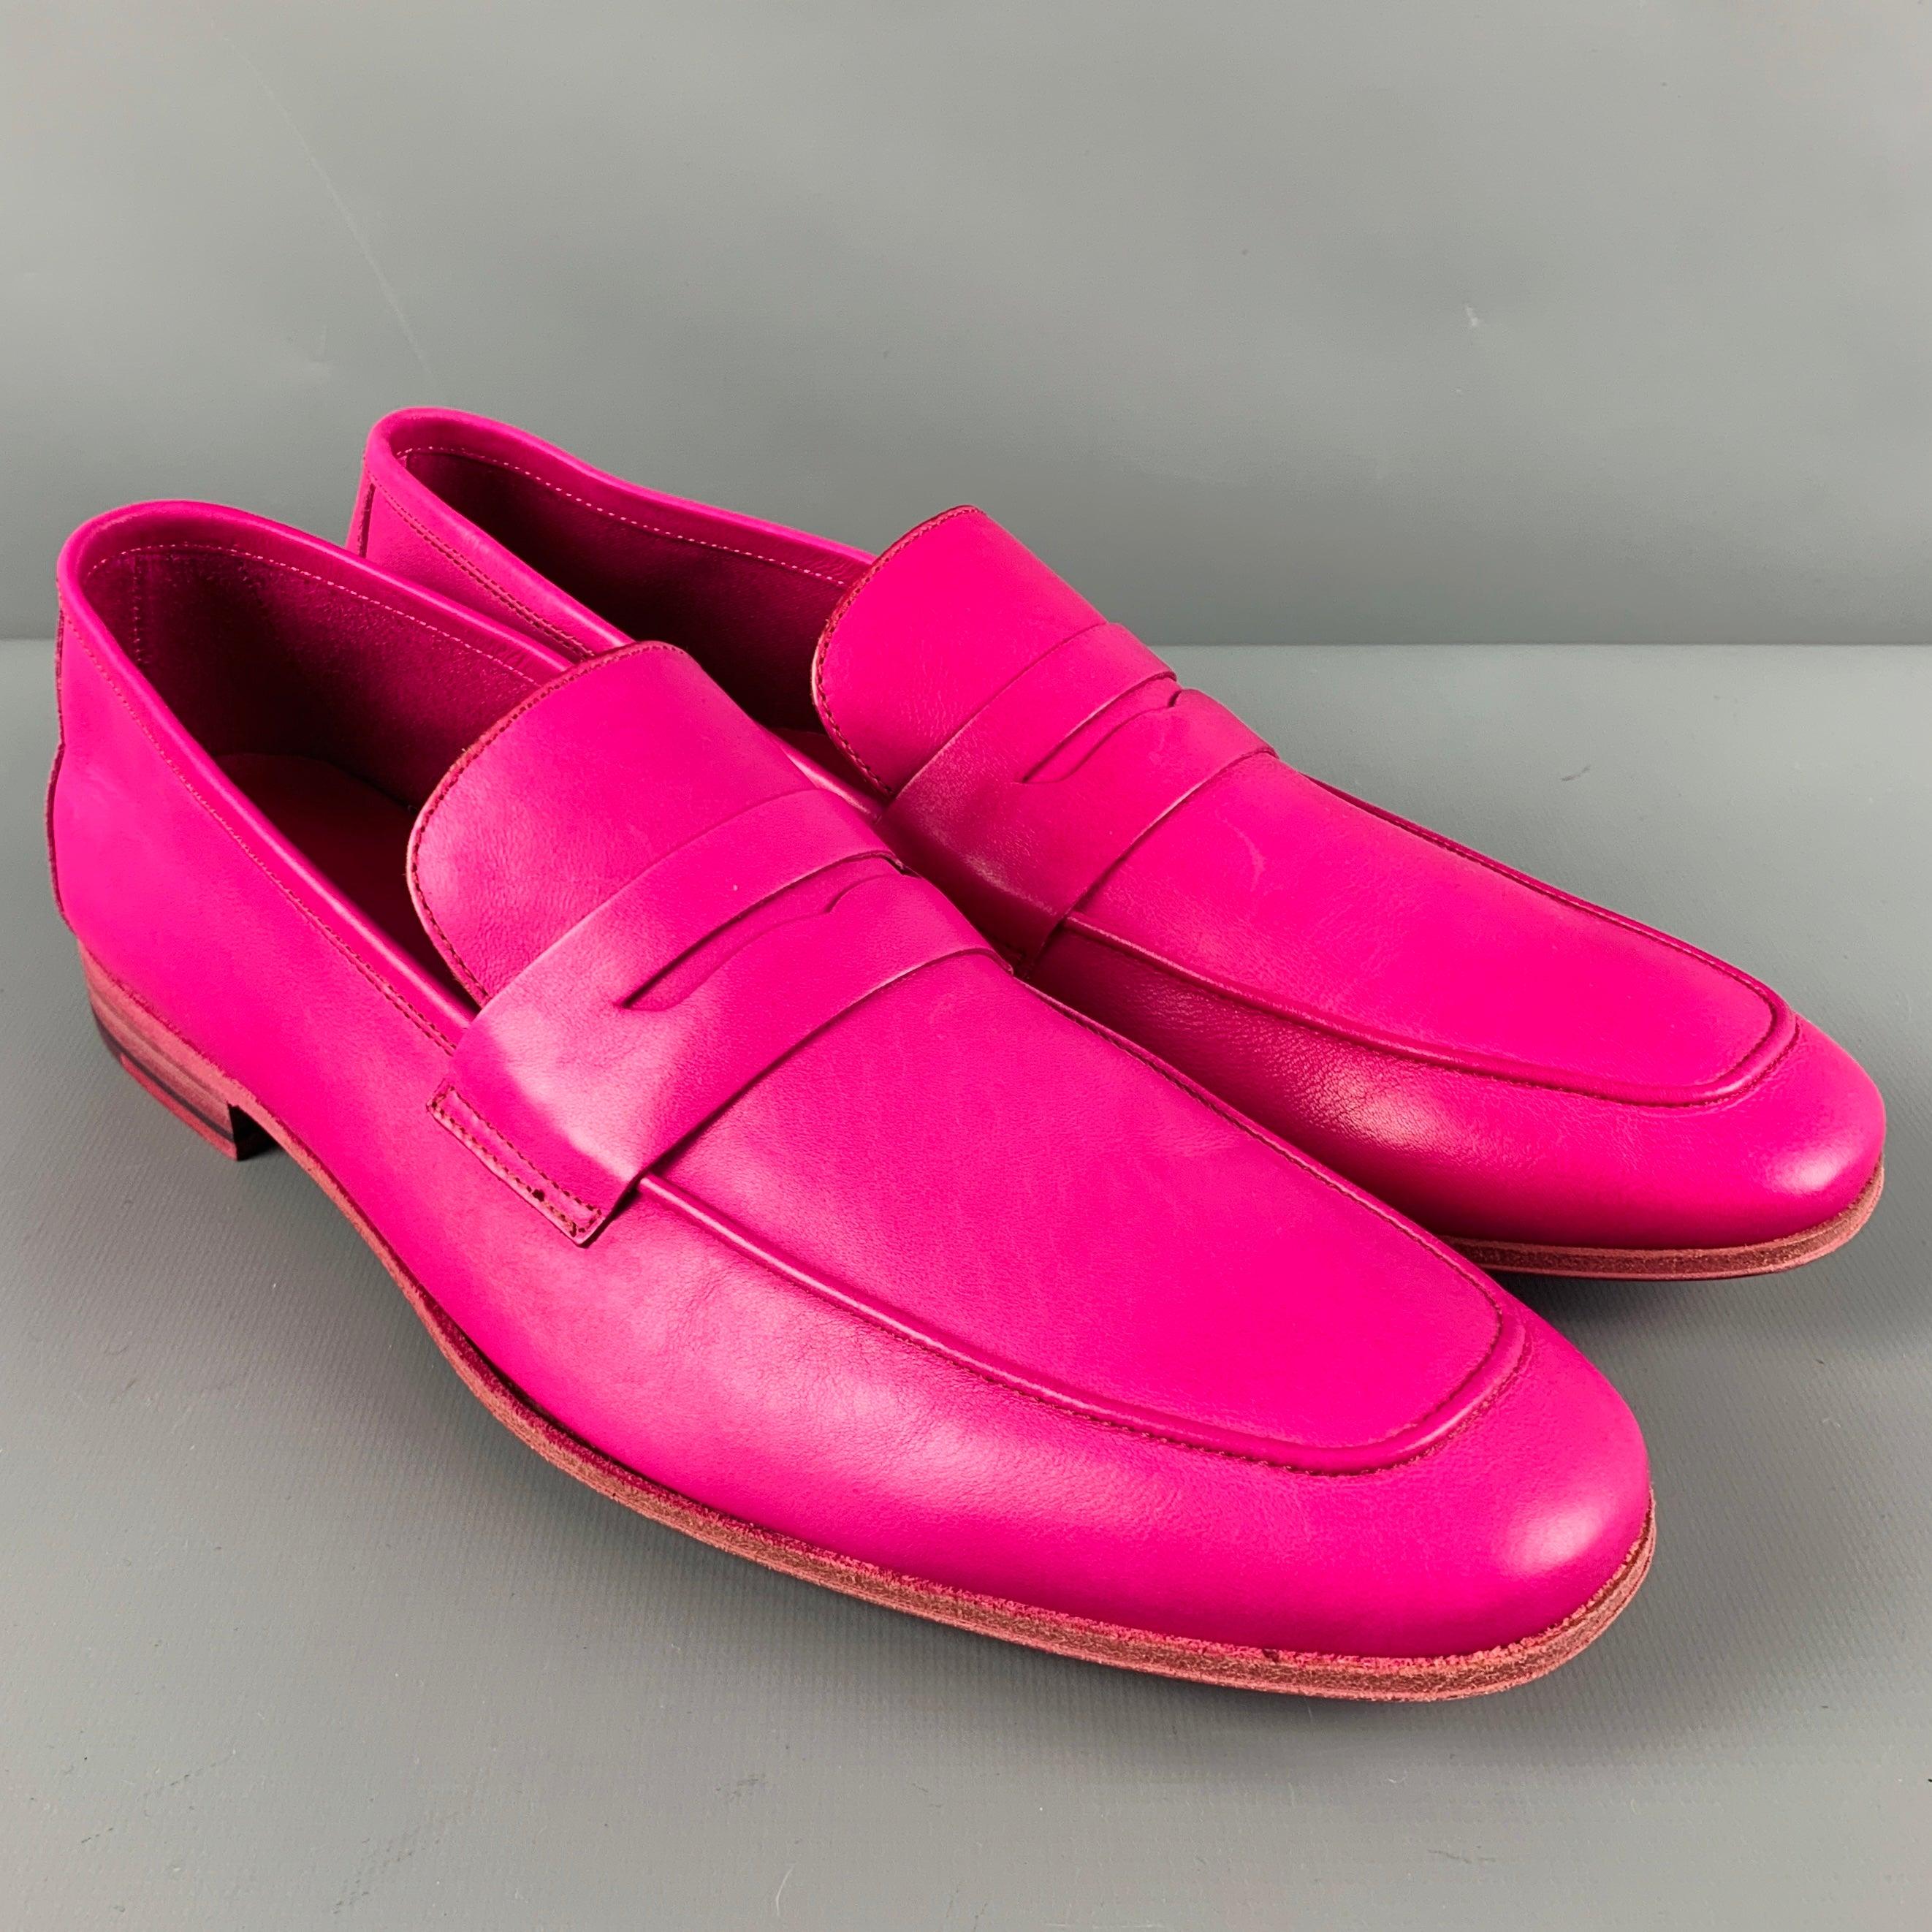 PAUL SMITH loafers in a fuchsia pink leather fabric featuring a slip-on penny style. Made in Italy.Very Good Pre-Owned Condition. 

Marked:   579010 V218 43 9Outsole: 11.5 inches  x 3.75 inches 
  
  
 
Reference No.: 128669
Category: Loafers
More